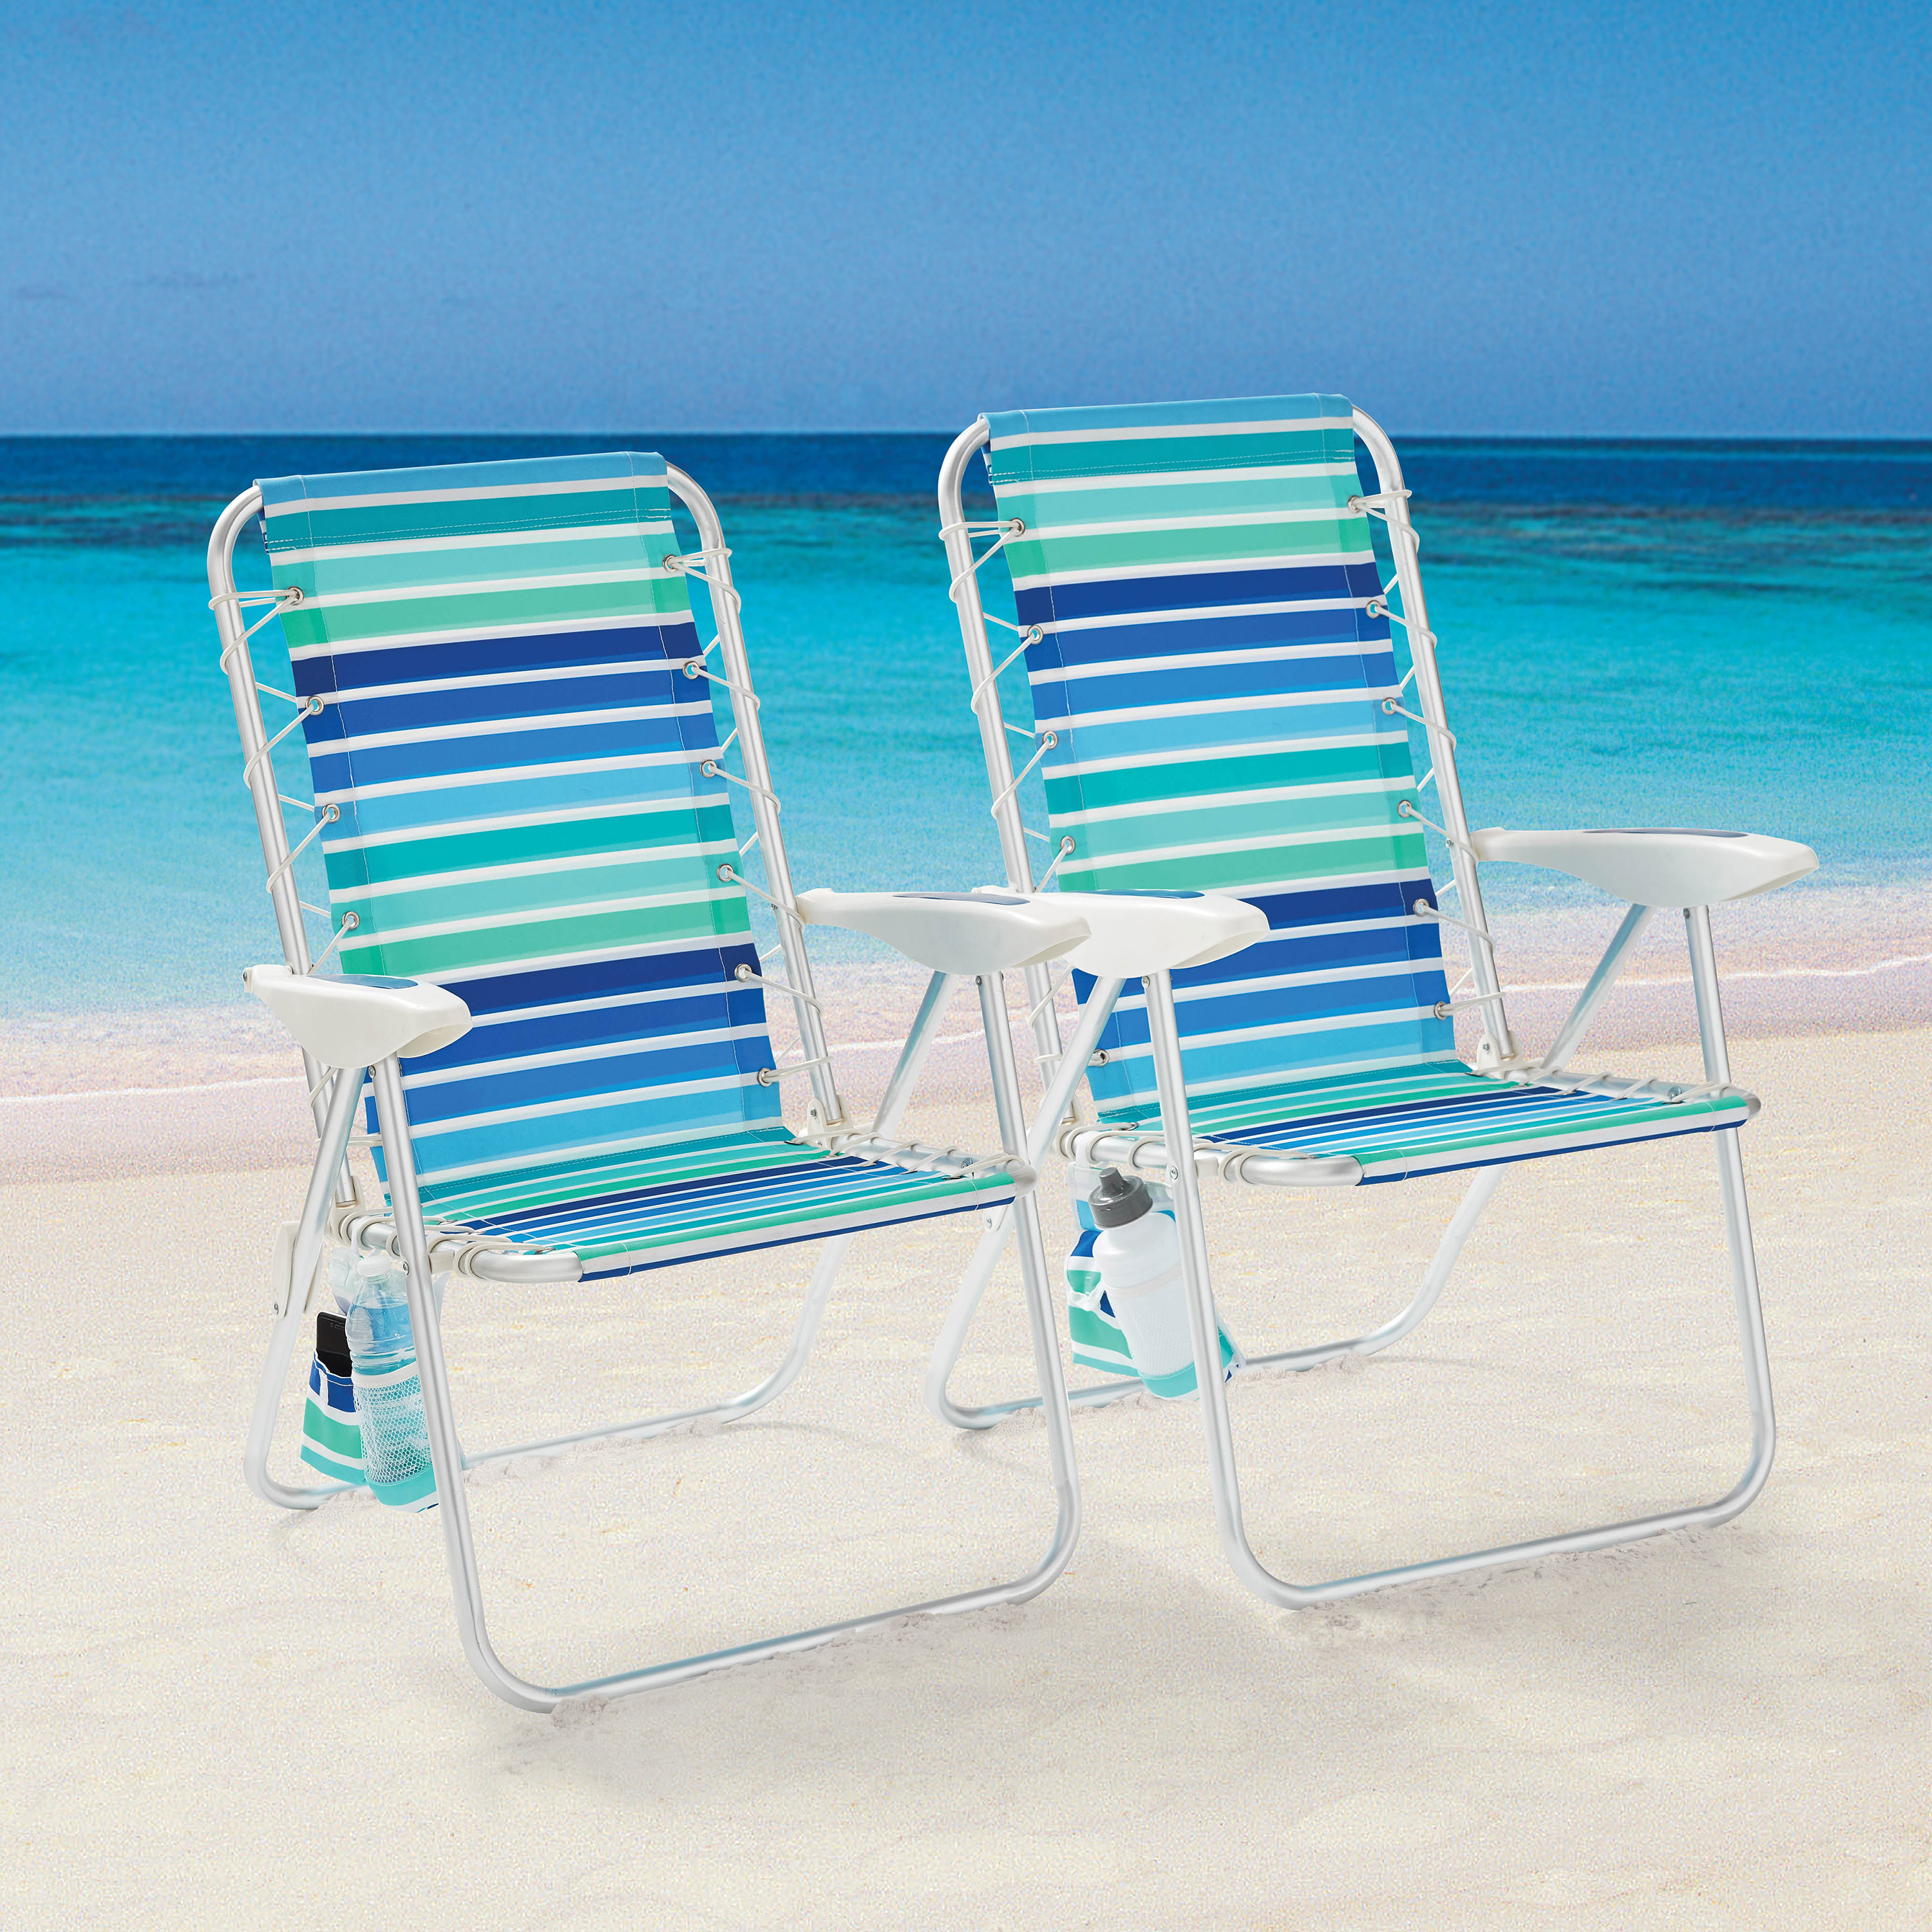 2-Pack Mainstays Reclining Bungee Beach Chair Blue & Green Stripe - image 1 of 9